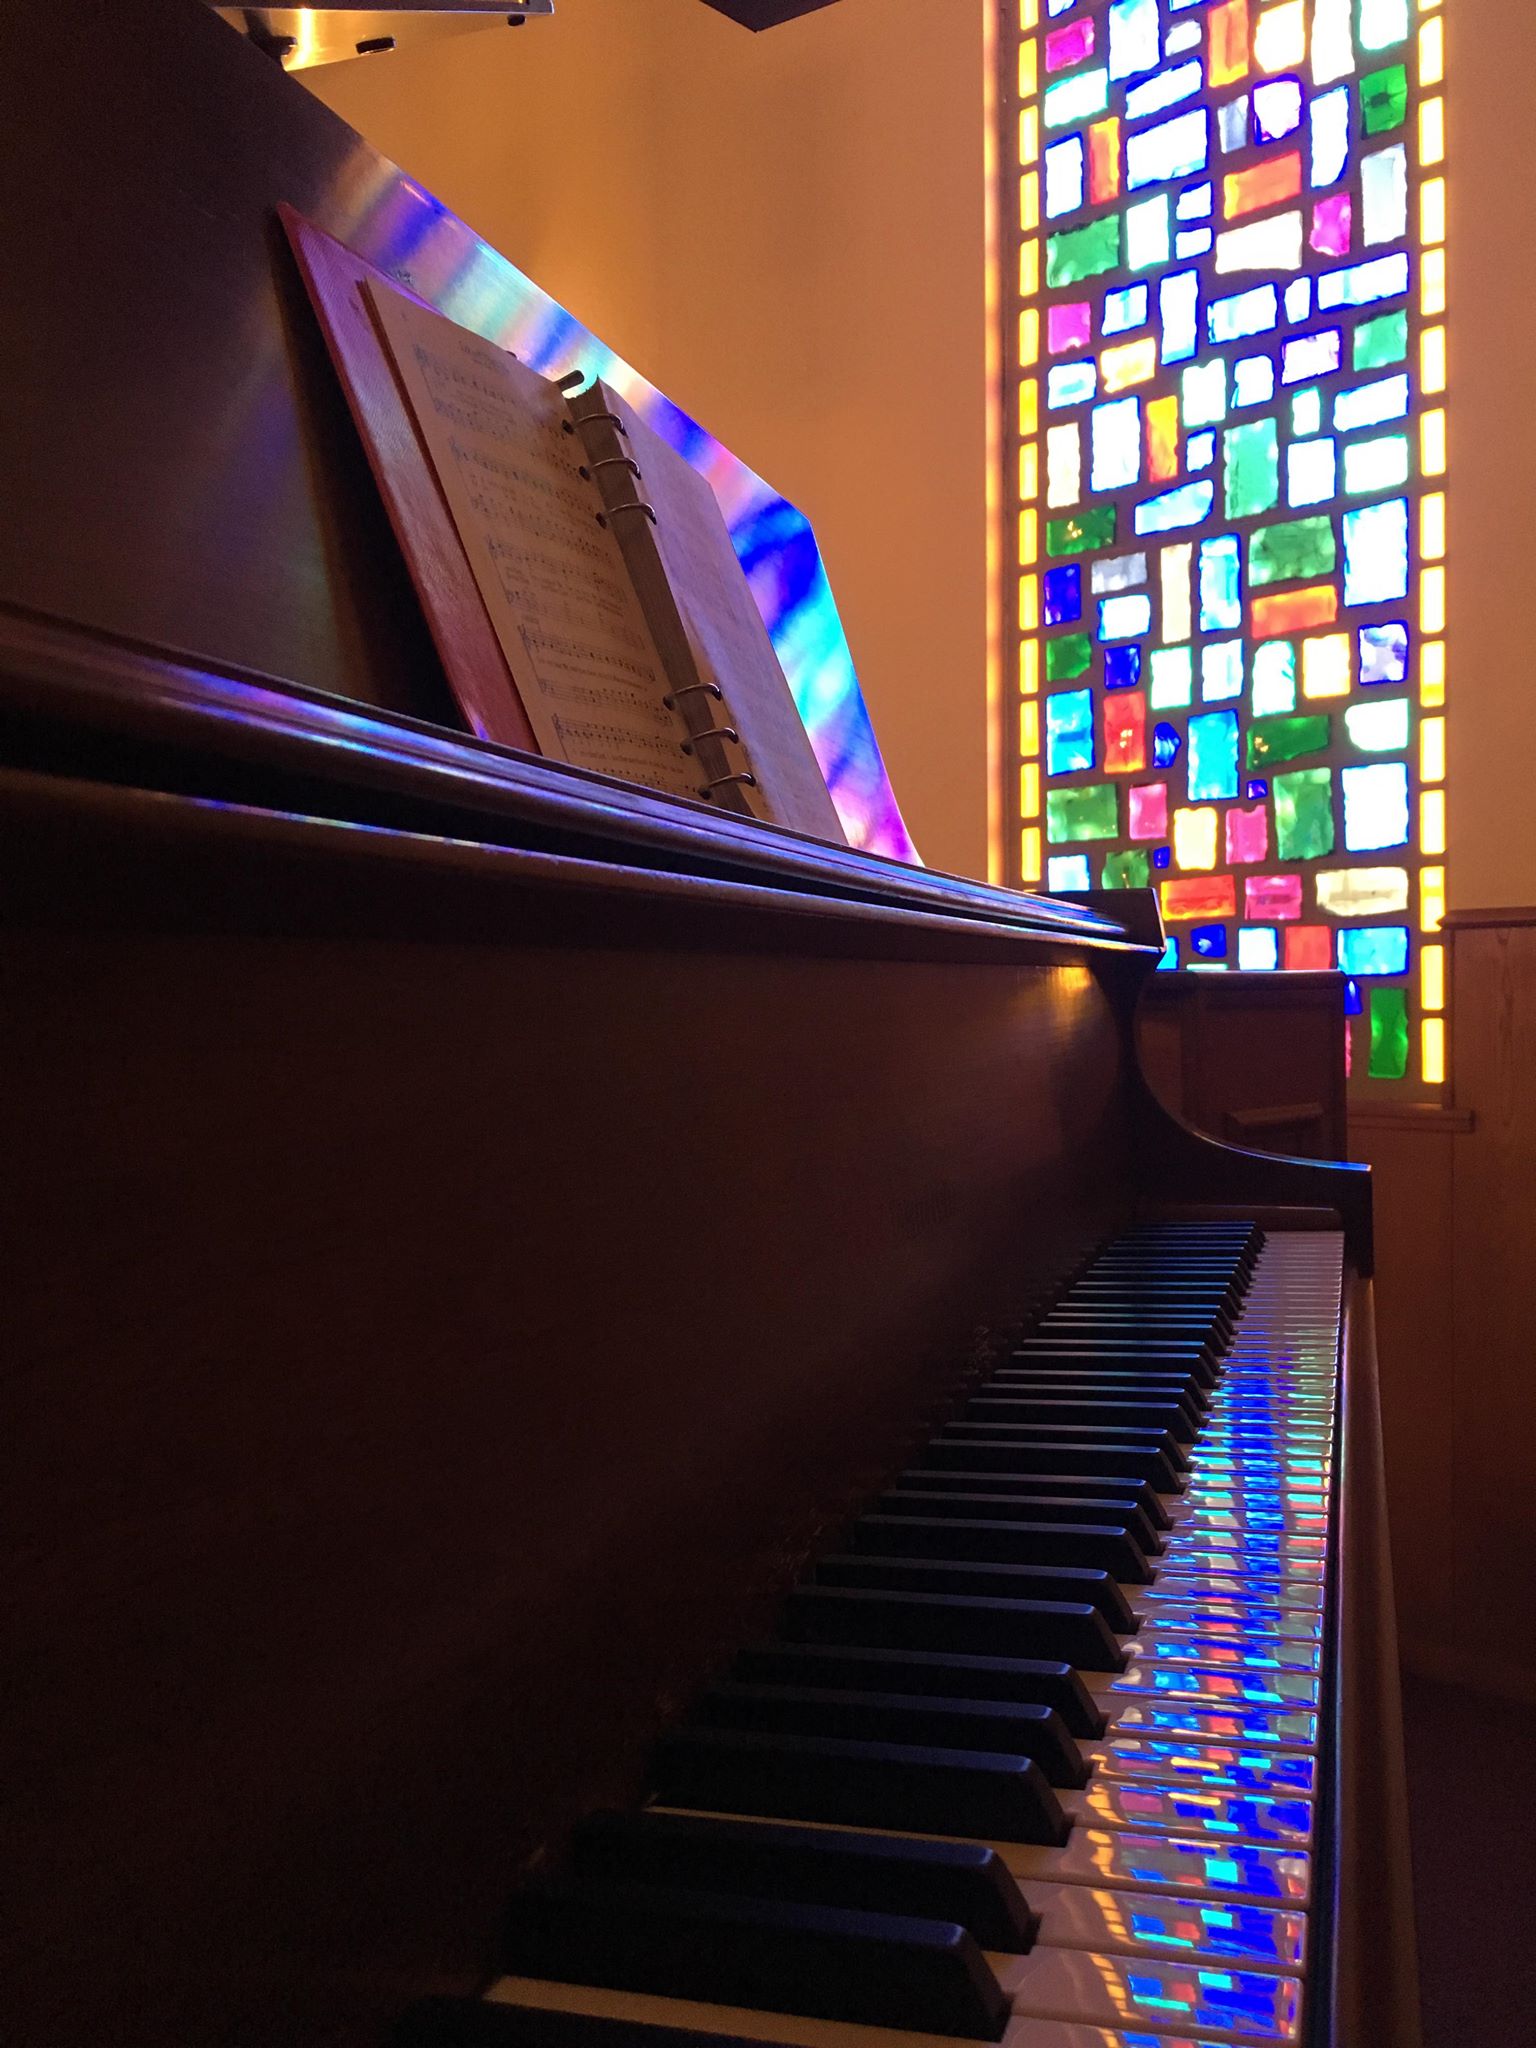 Stained glass reflecting on piano keys